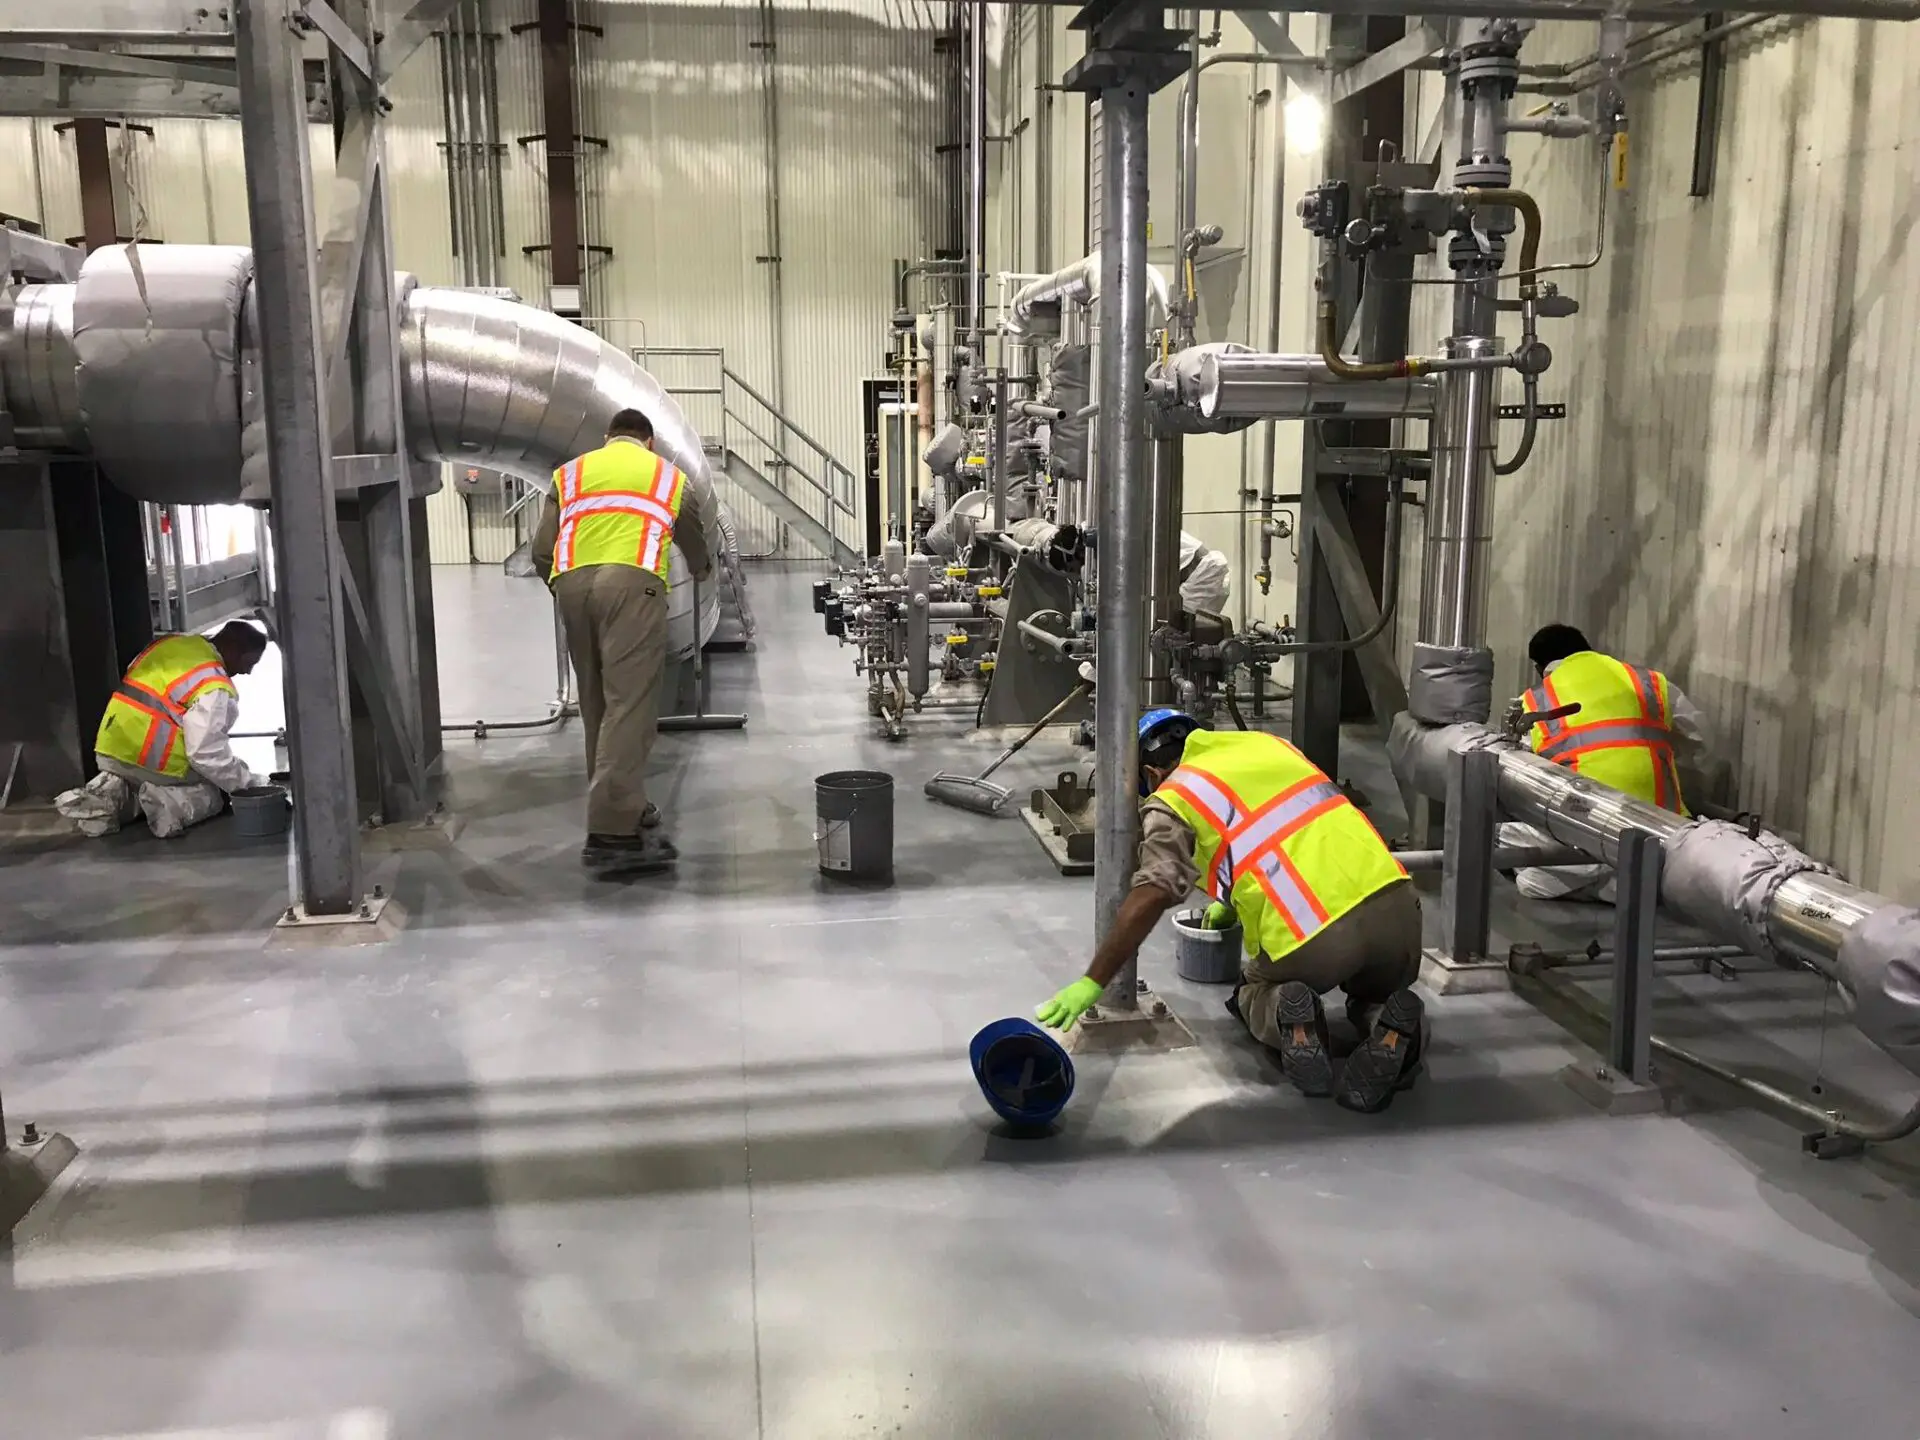 Workers putting non-slip layer on the floor